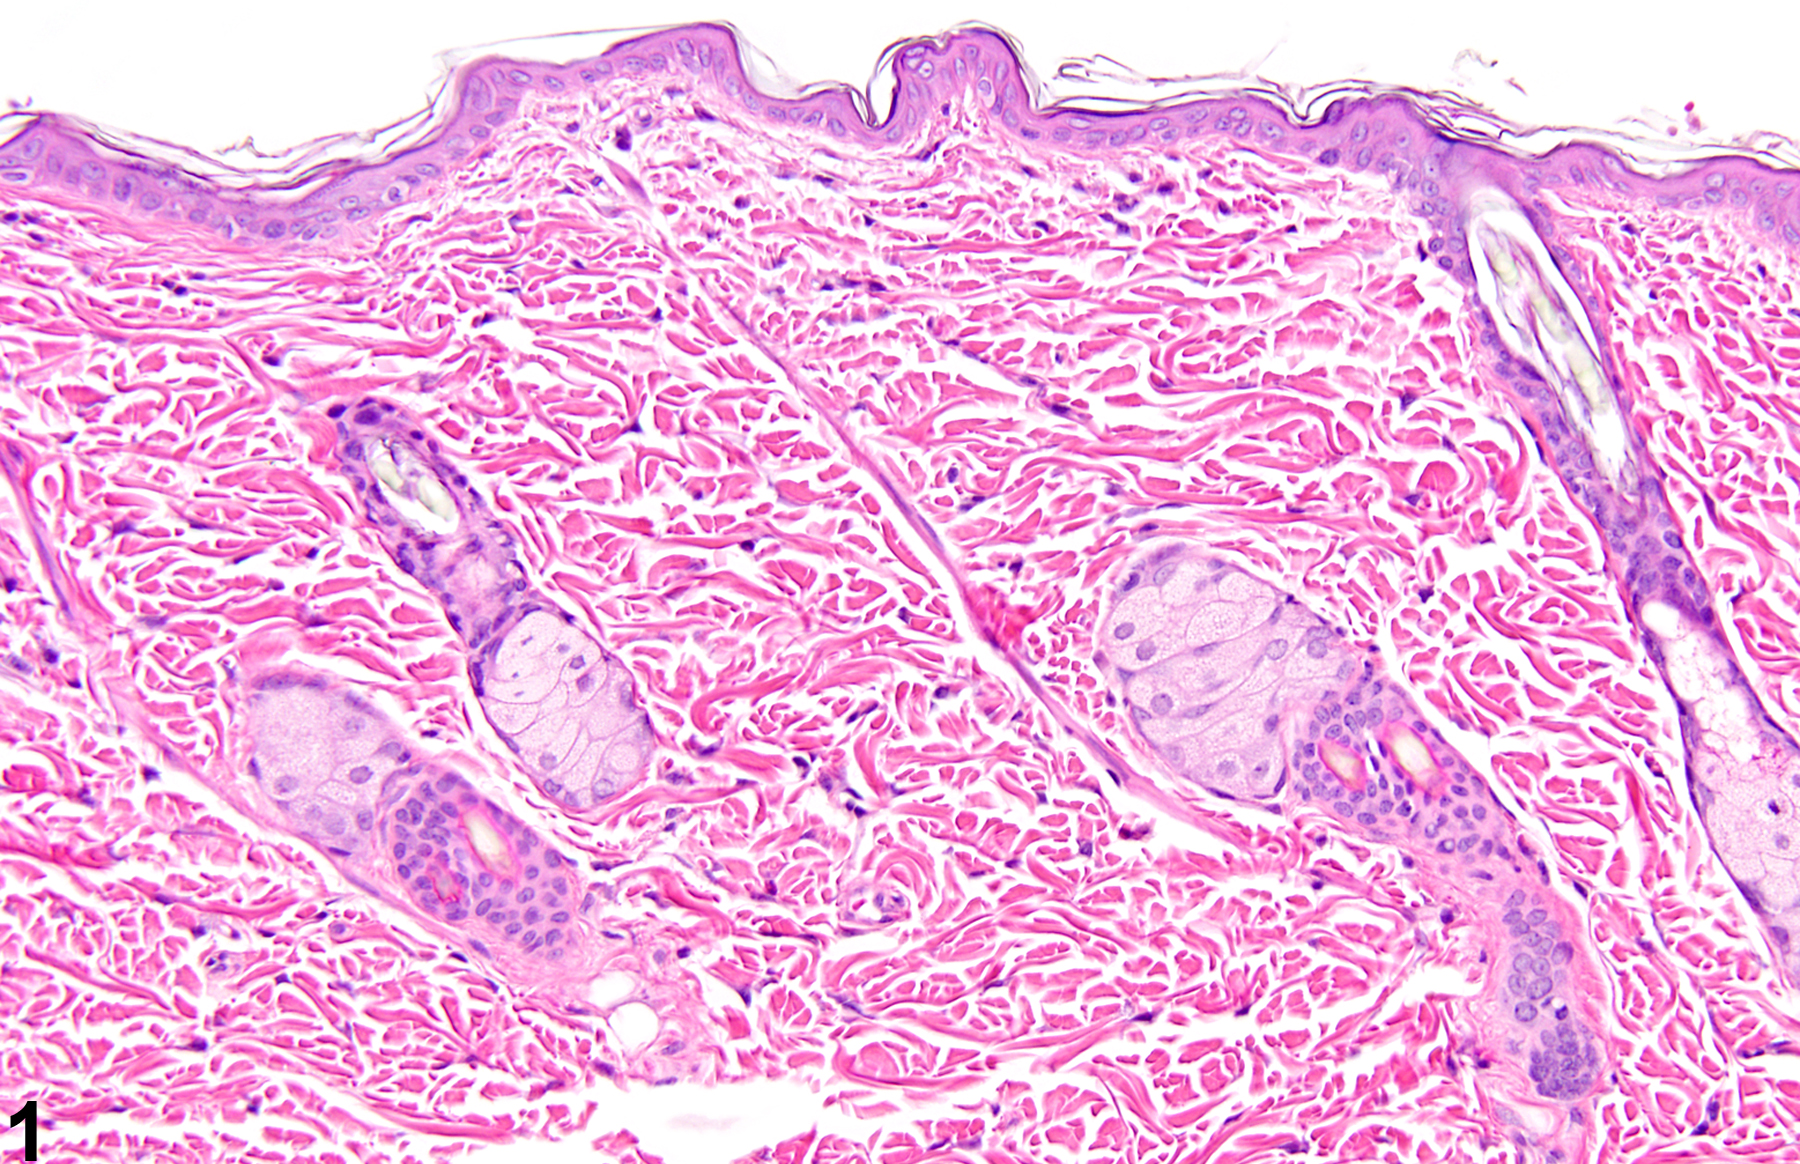 Image of atrophy (normal comparison) in the skin from a female F344/N rat in an acute study